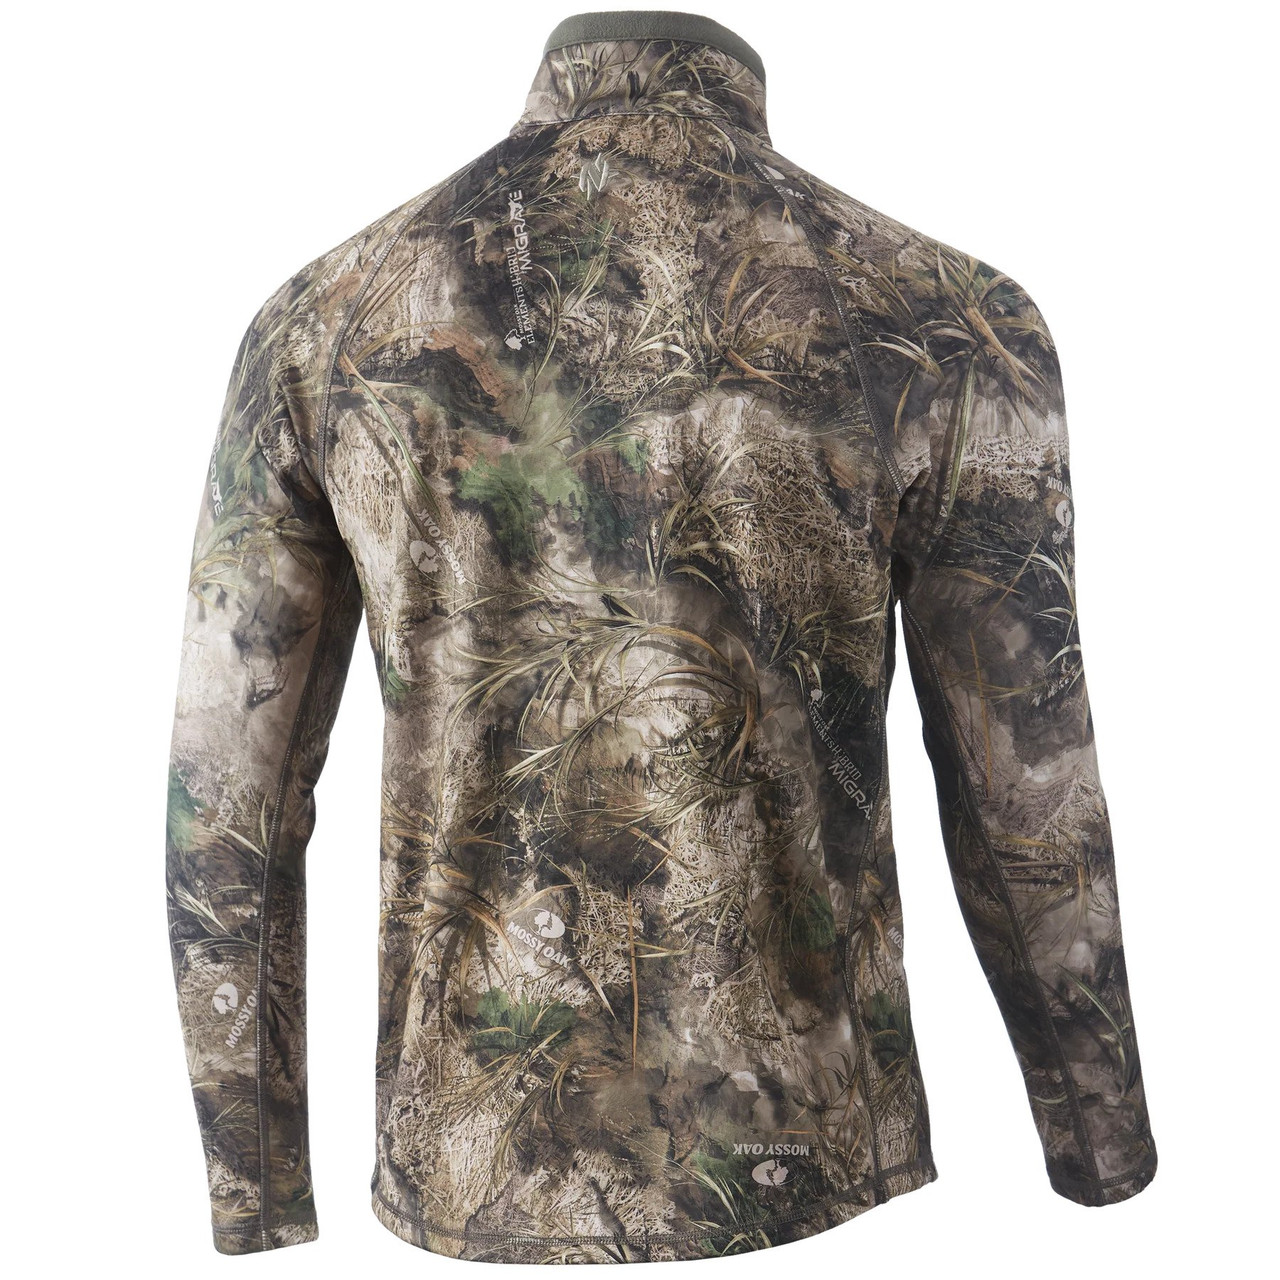 Nomad Utility Camo Pullover Jacket 1/2 Zip - Mossy Oak Migrate - 2X-Large